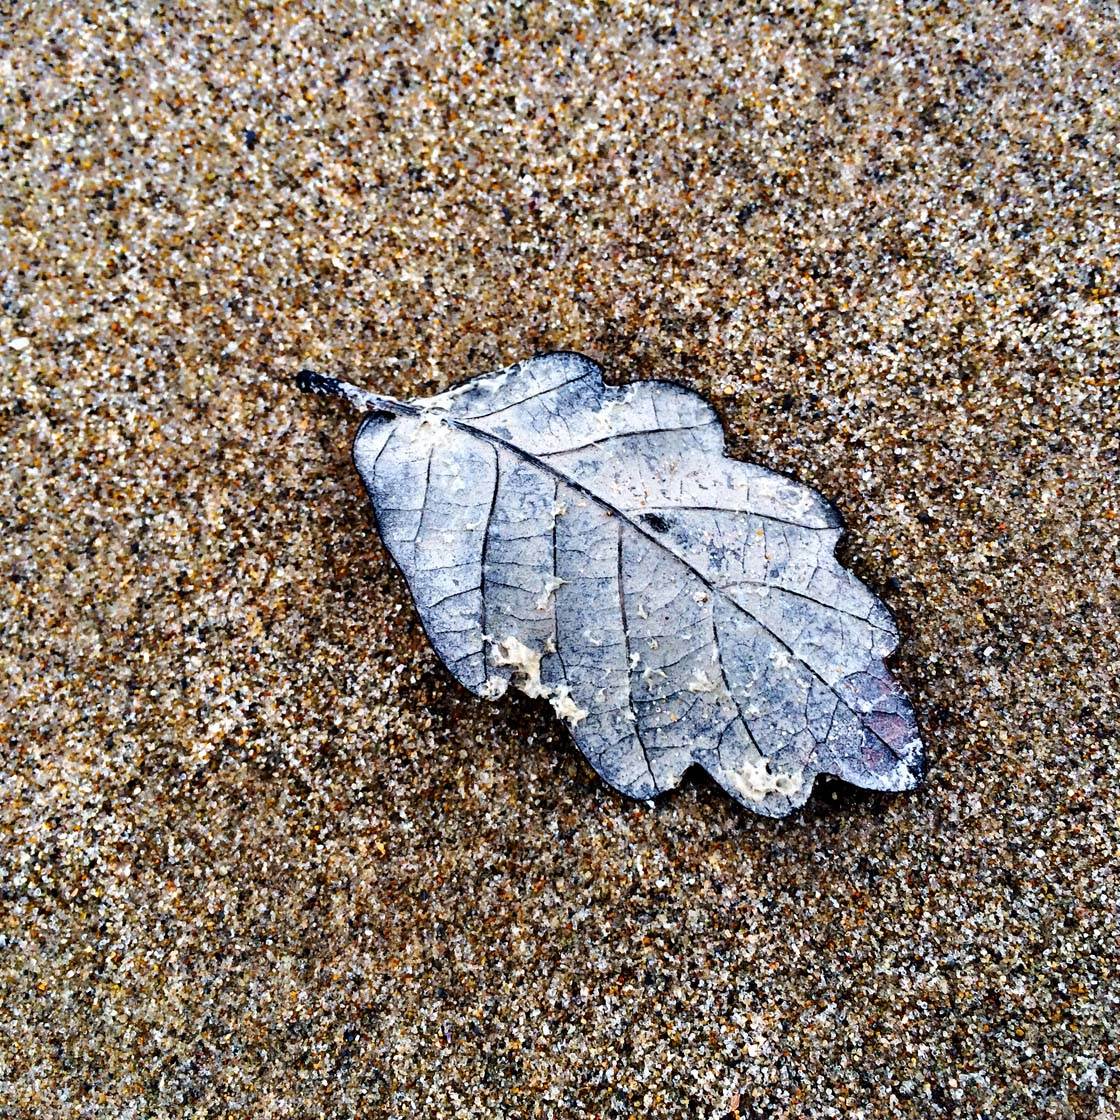 iPhone Photos of Leaves 20